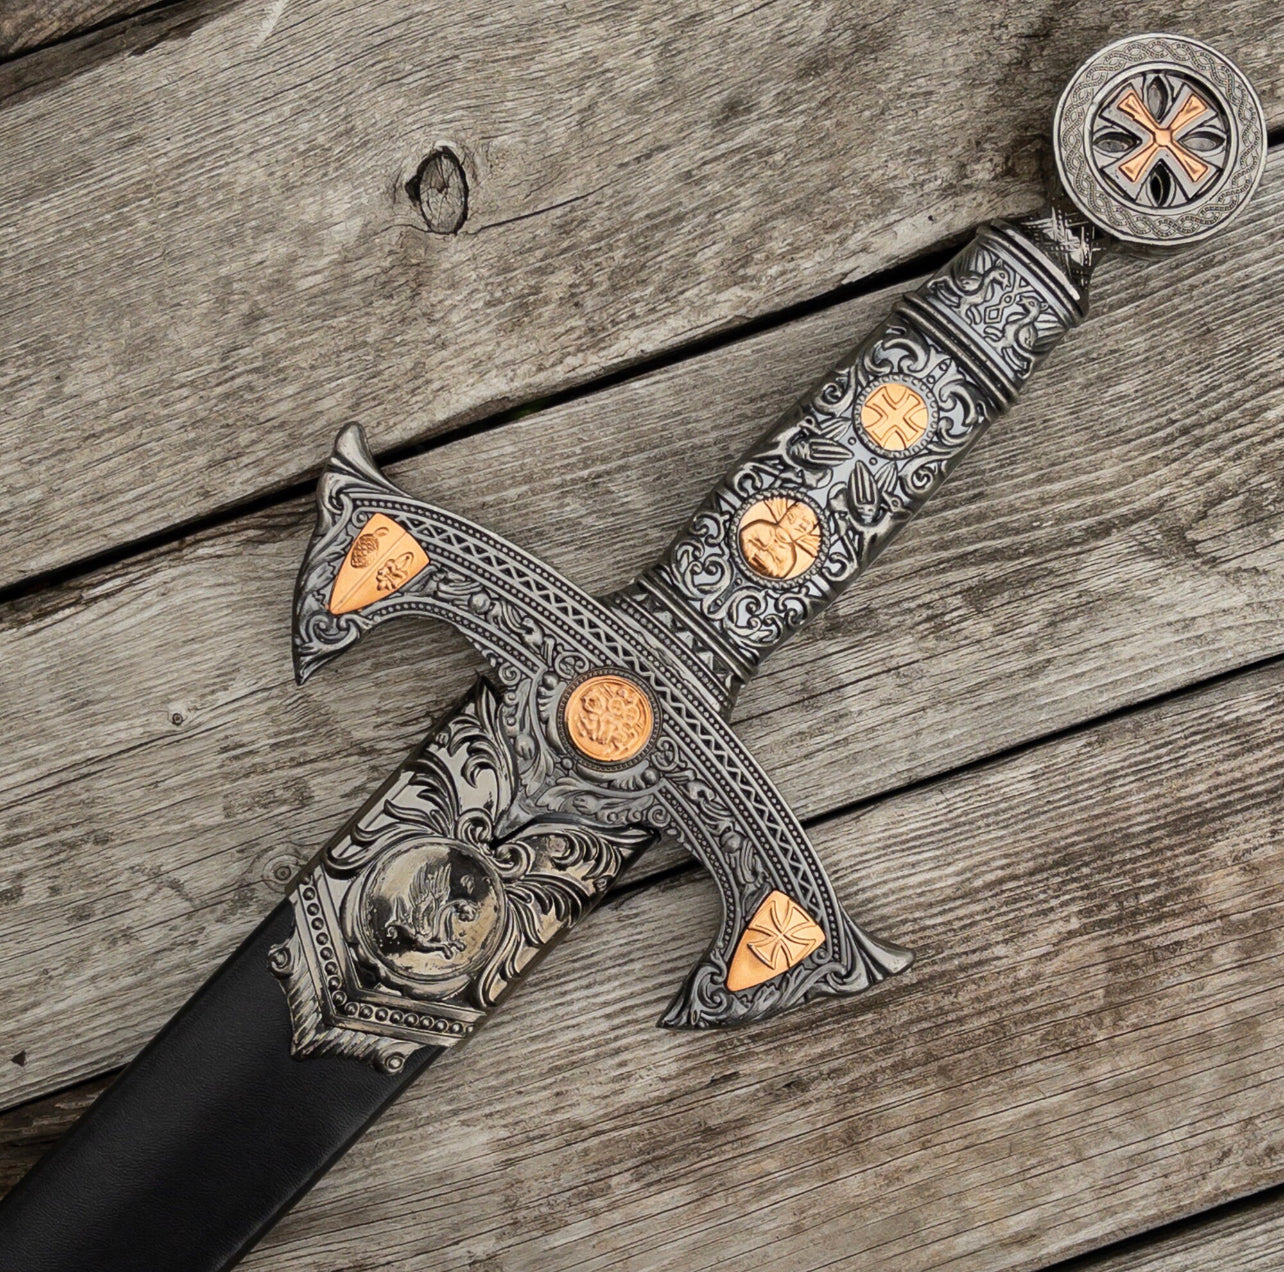 Knights Templar Crusader Decorative Sword - Medieval Inspired Stainless Steel Collectible Replica Display Sword with Scabbard